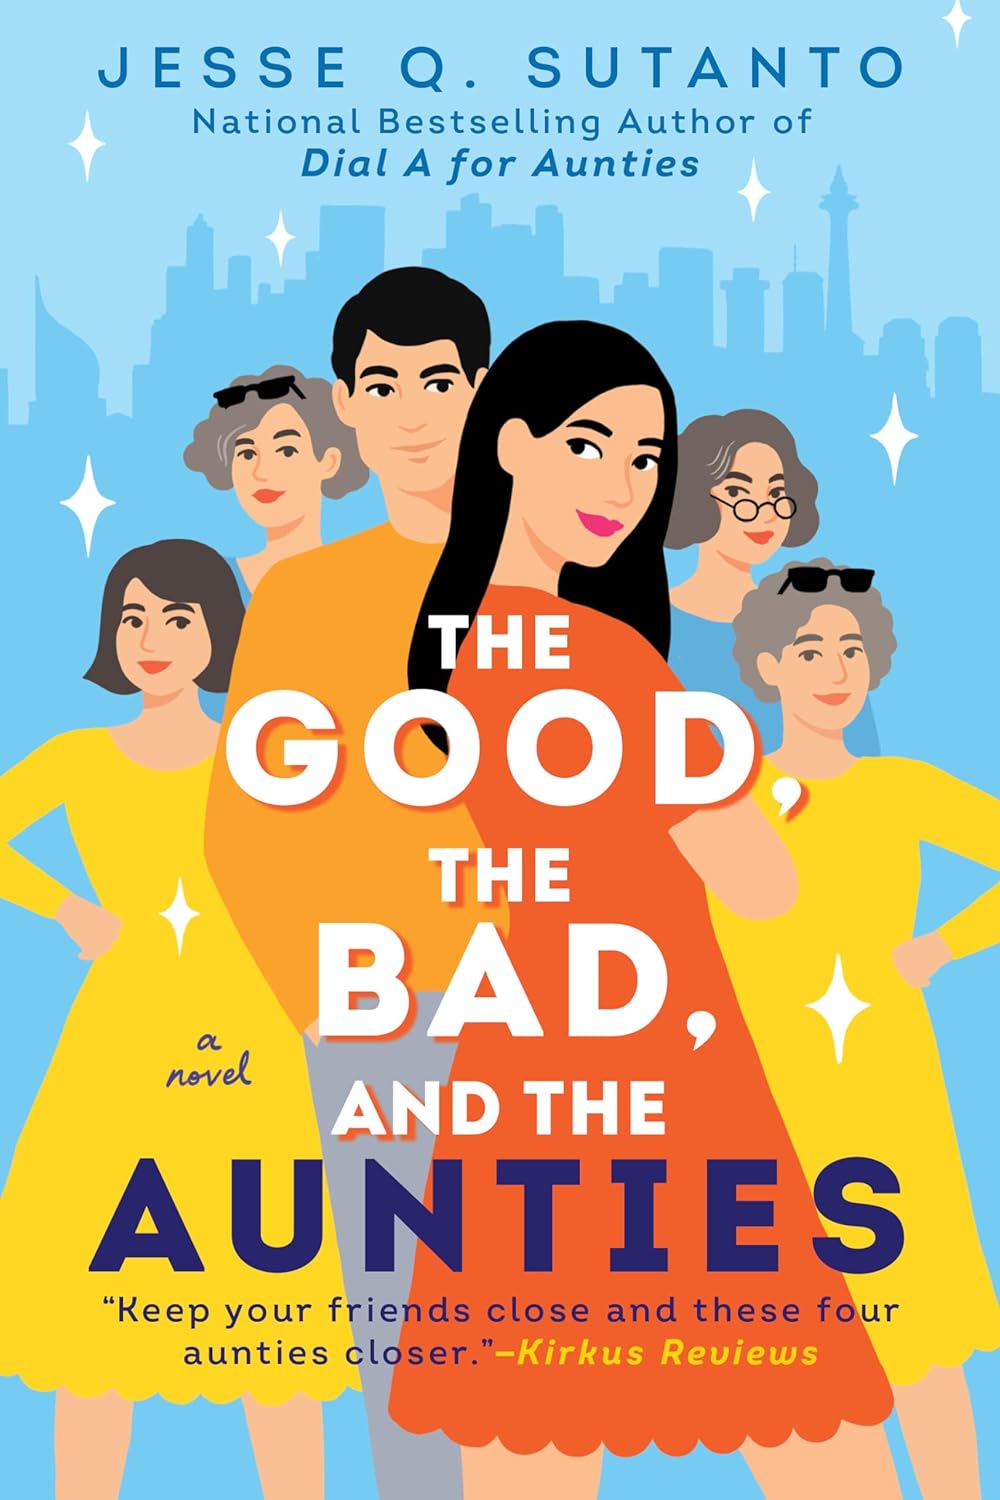 Image for "The Good, the Bad, and the Aunties"